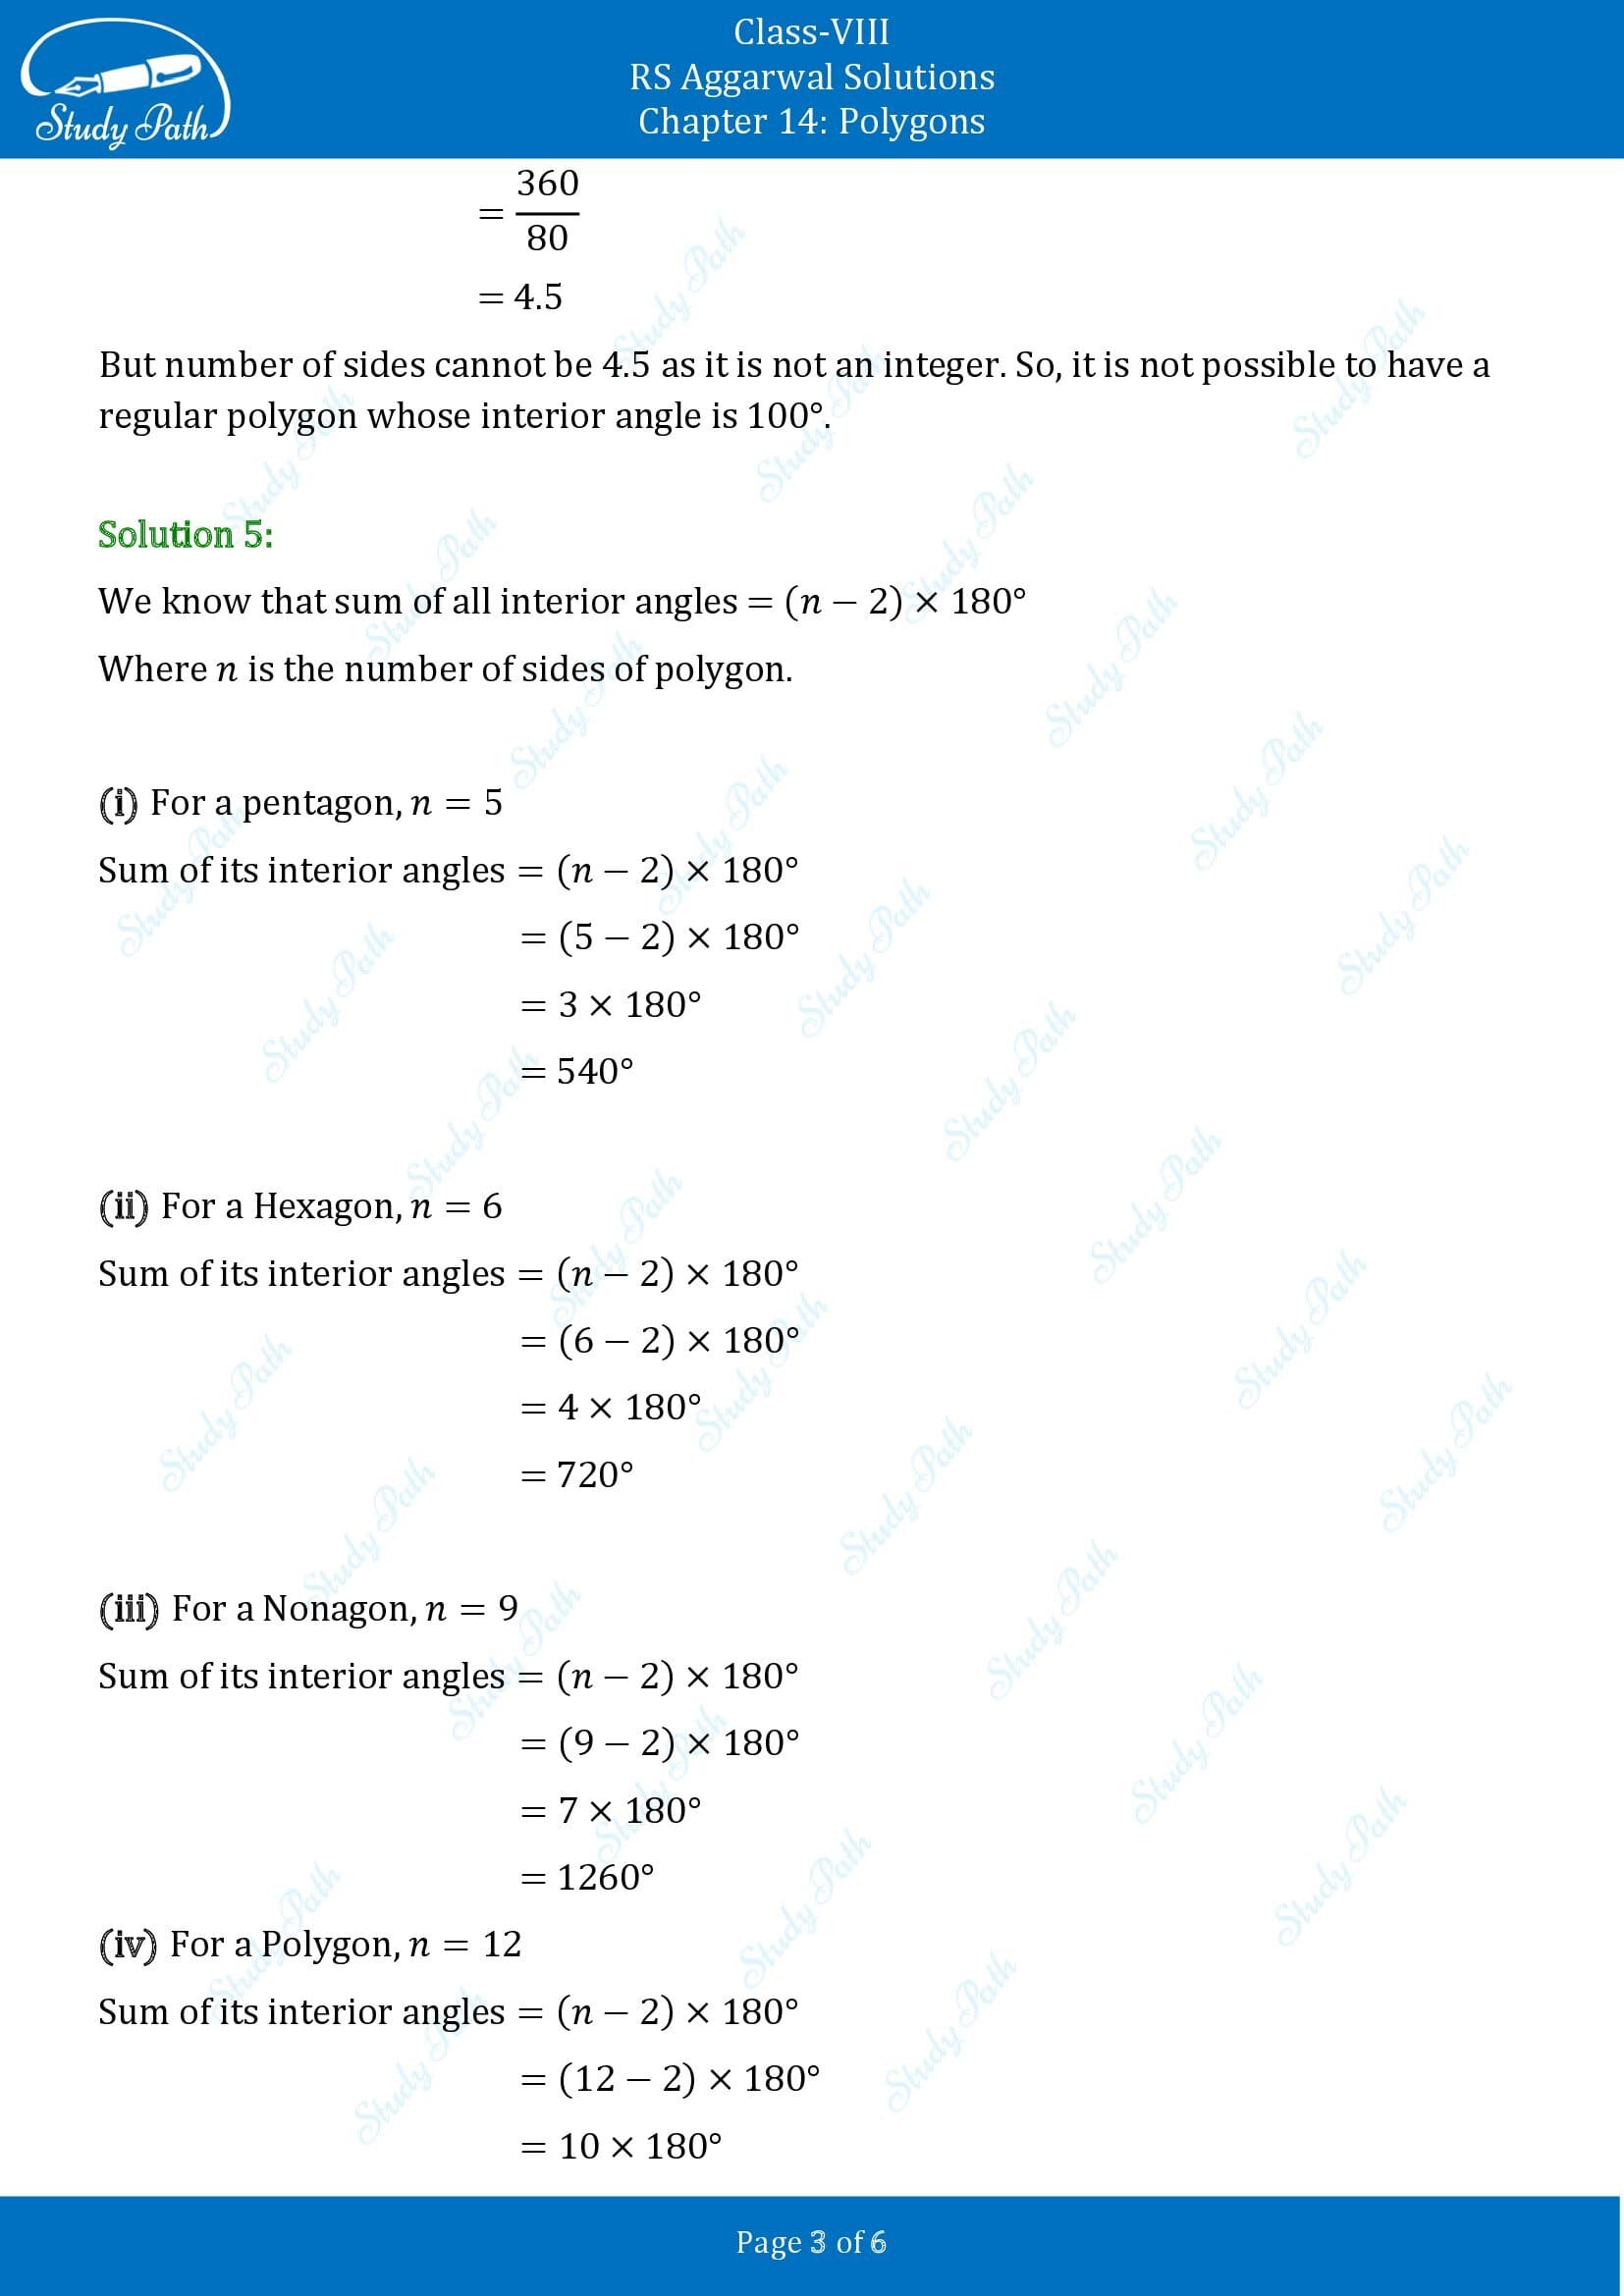 RS Aggarwal Solutions Class 8 Chapter 14 Polygons Exercise 14A 00003